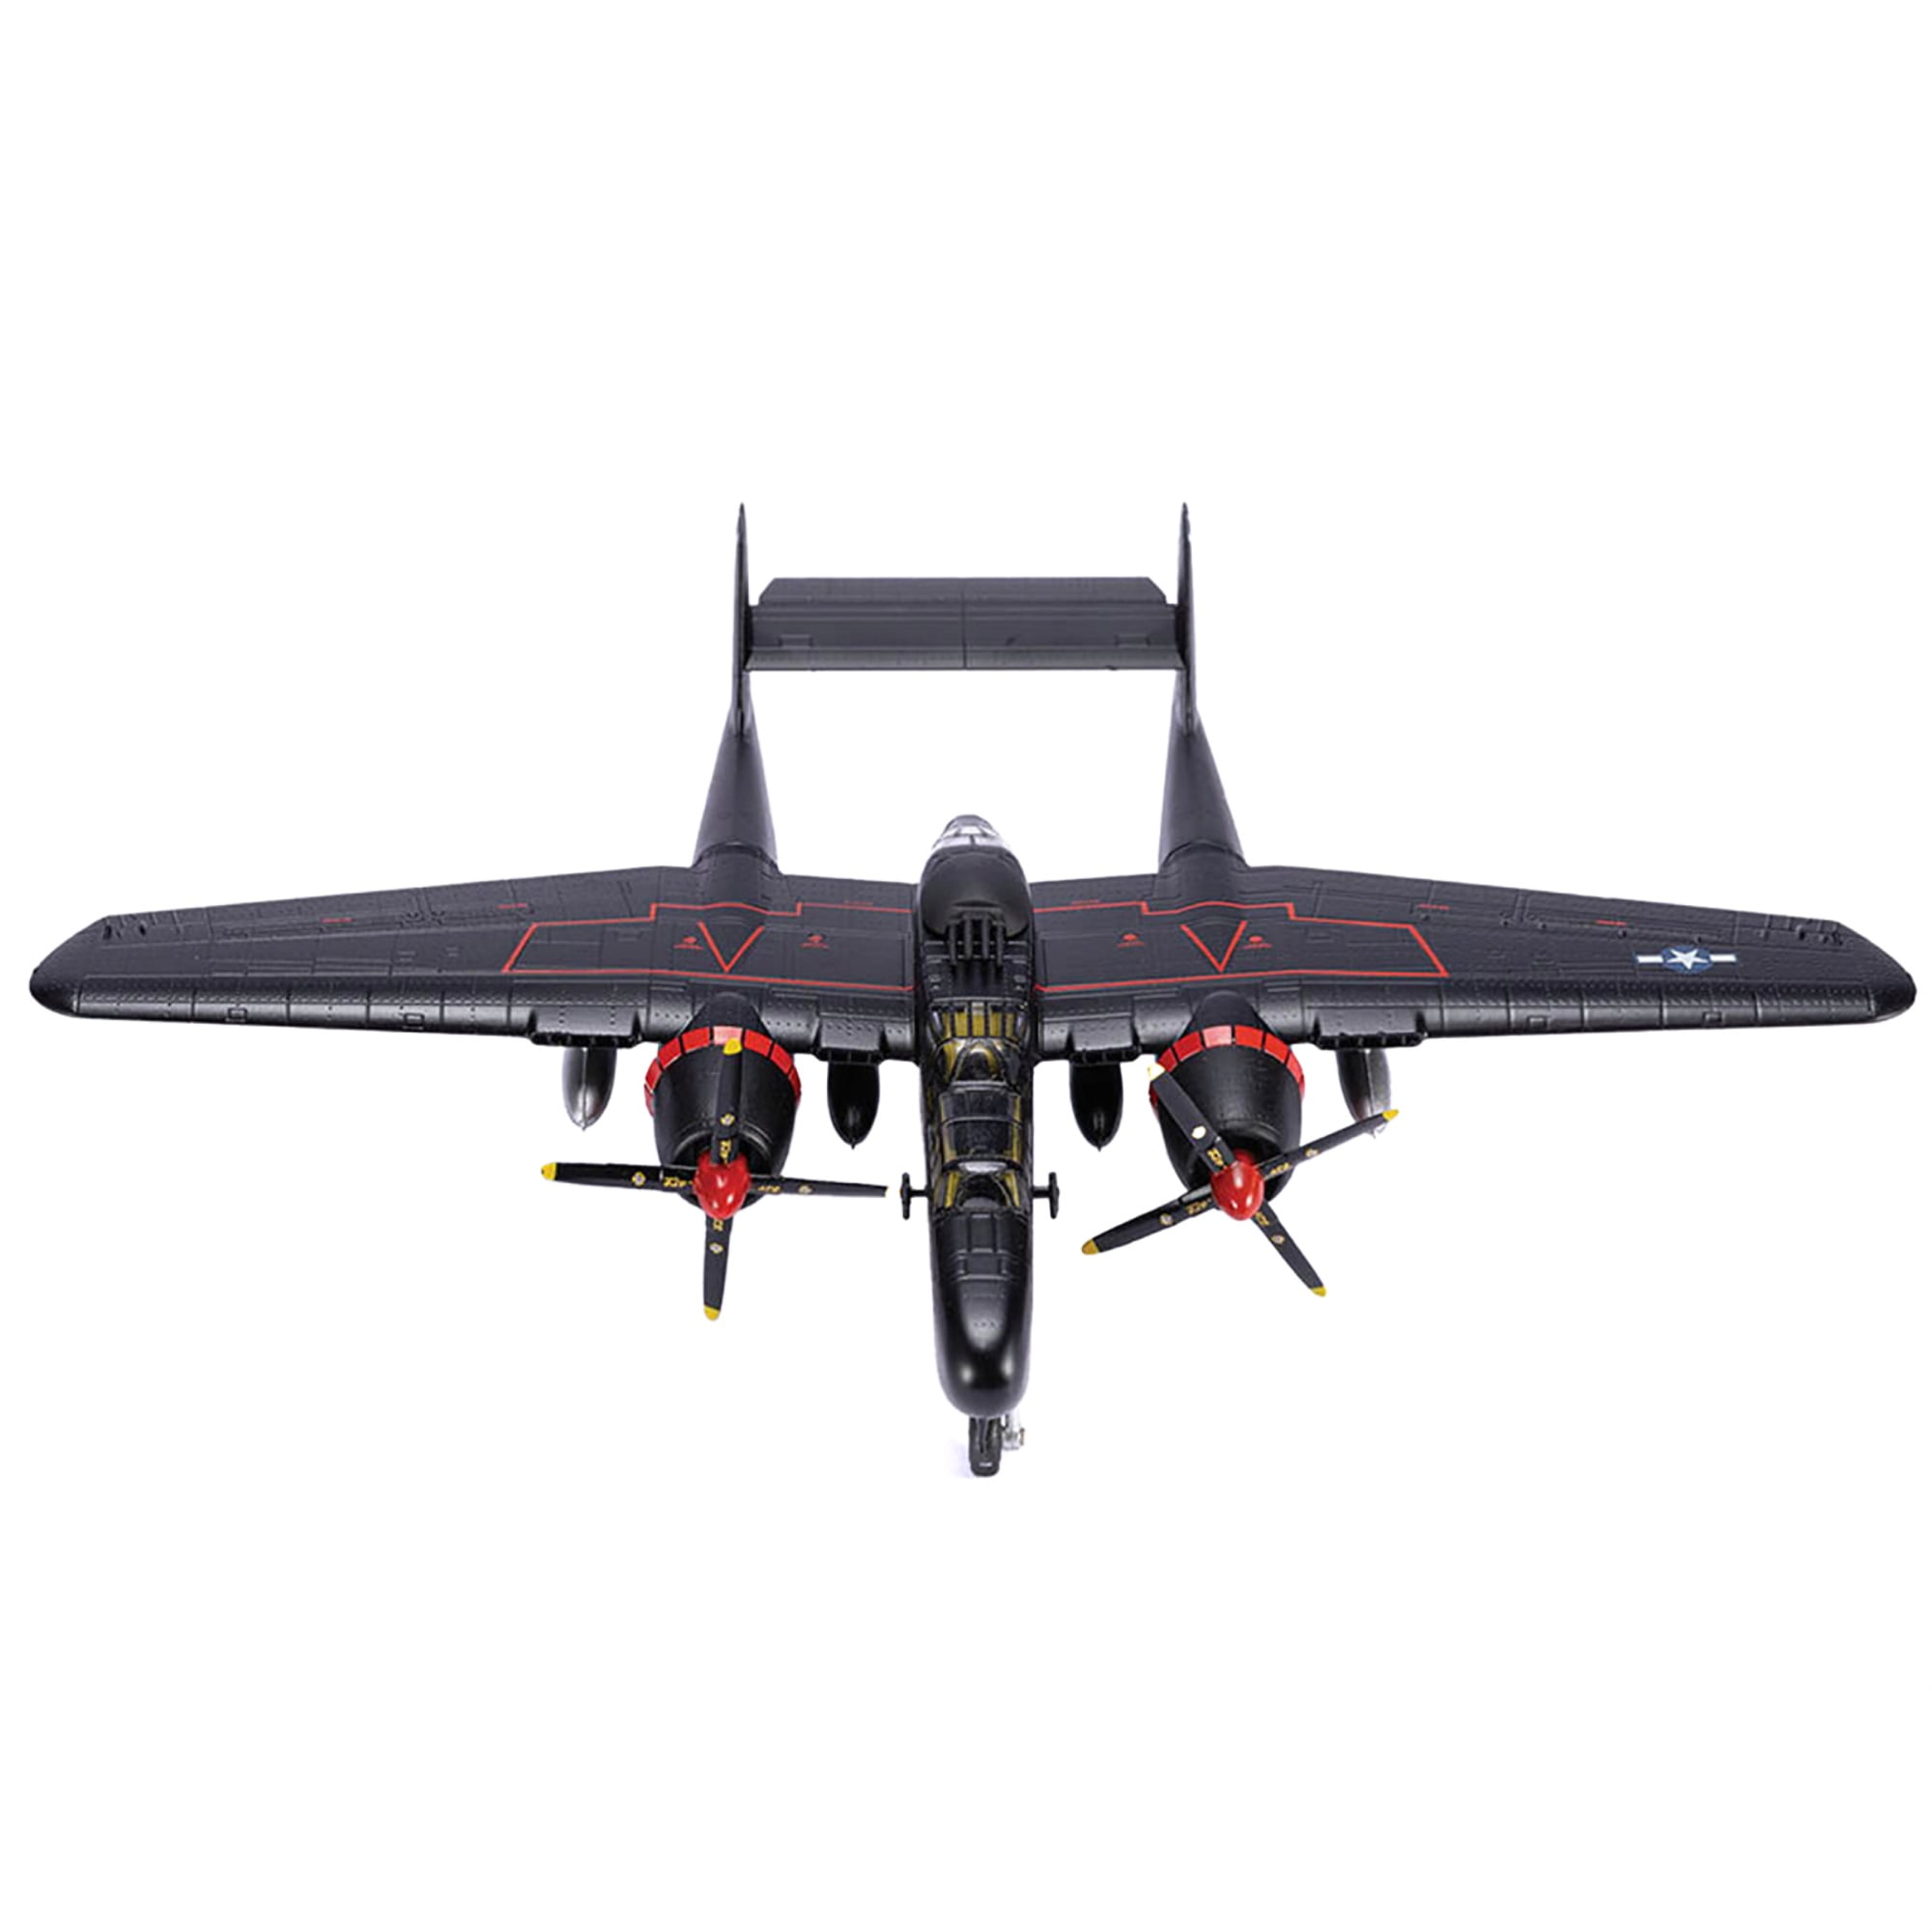 Picture of Air Force 1 AF1-0090F 1-72 Scale Northrop P-61B Black Widow Fighter Aircraft Times a Wastin 418th Night Fighter Squadron United States Army Air Forces Diecast Model Airplane